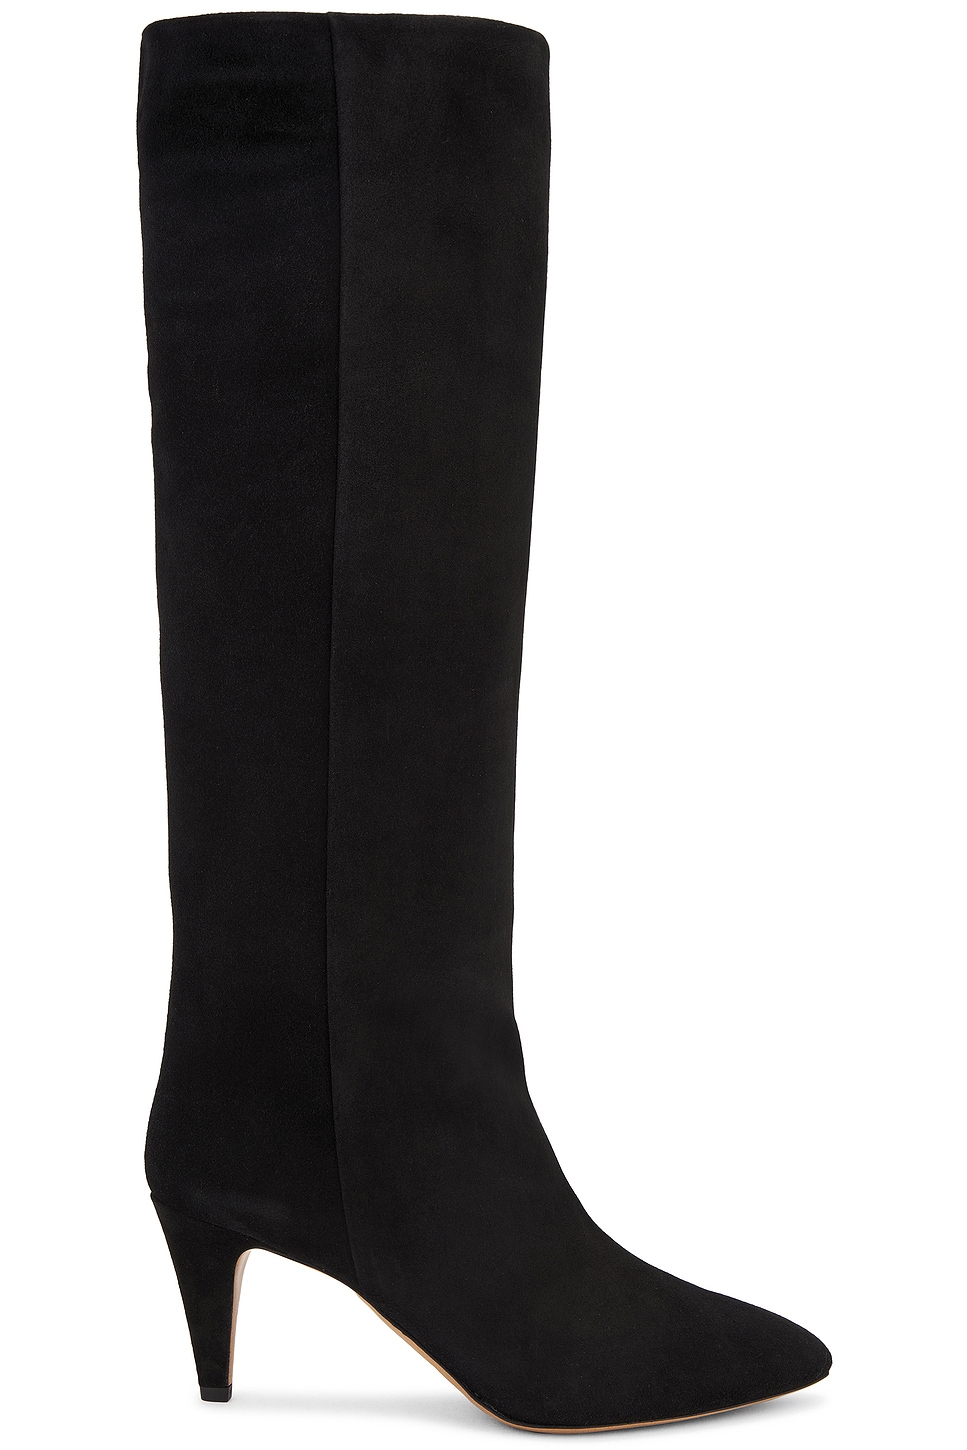 Laspi Suede Boot in Black